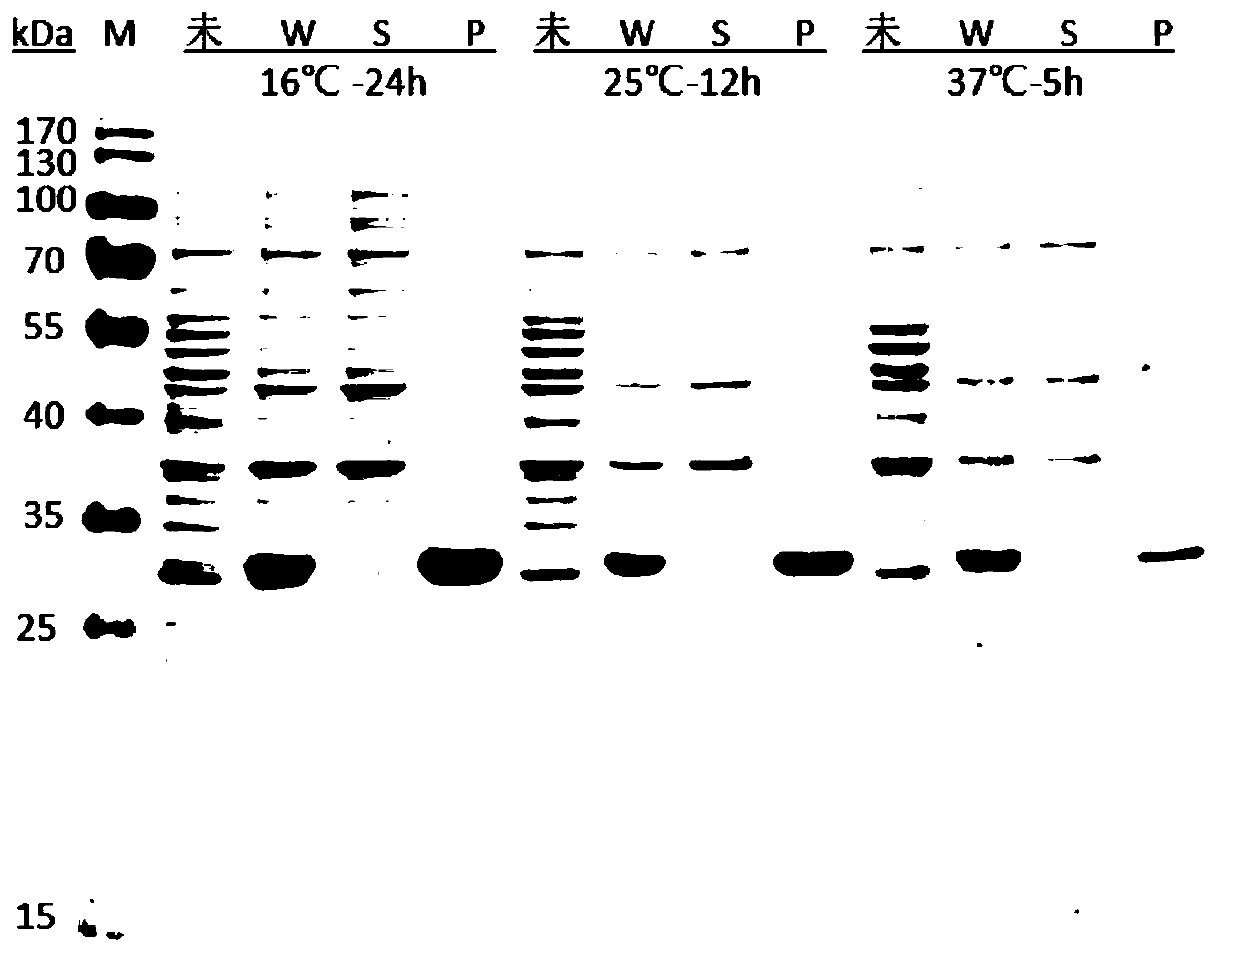 Recombinant expression method for hypoglycemic polypeptide Aglycin and application thereof